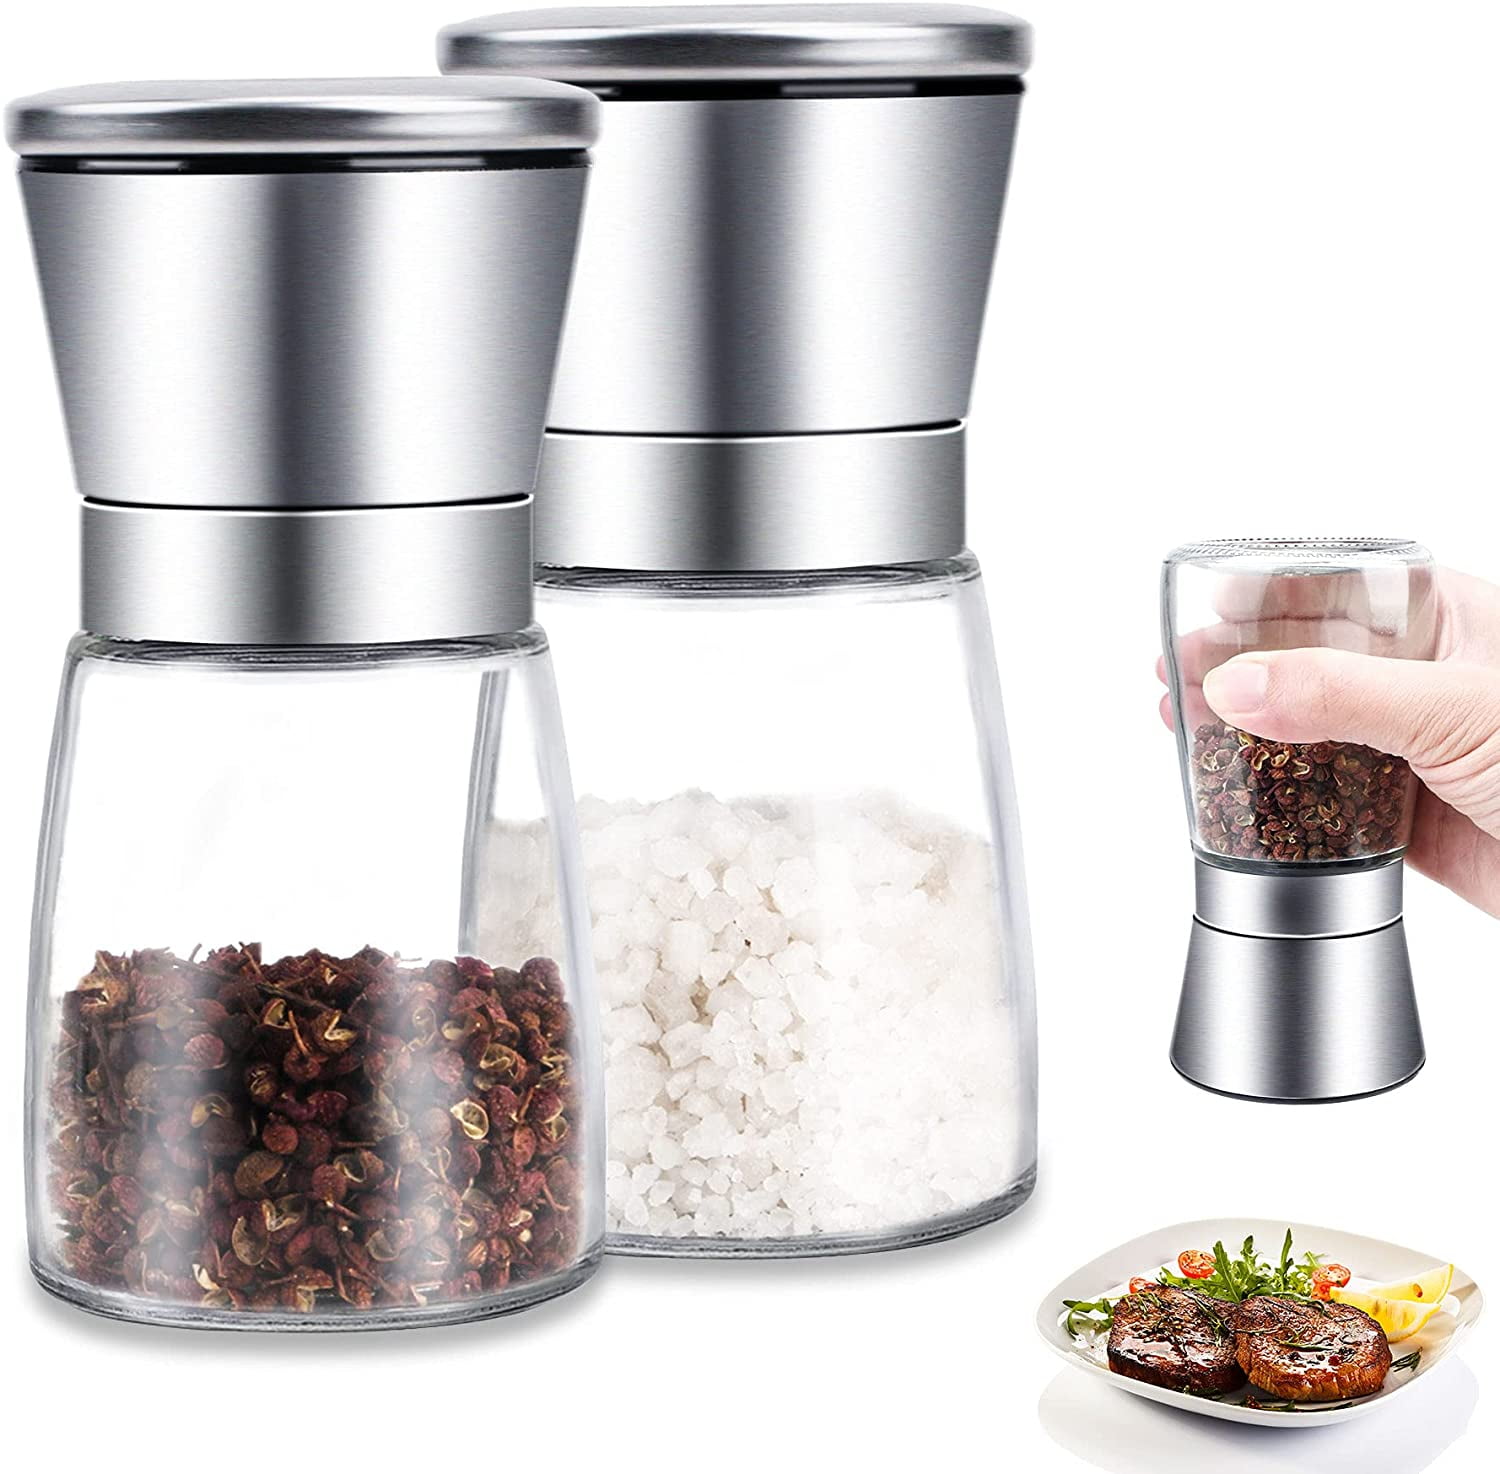 Salt And Pepper Grinder Set With Stand Stainless Steel&Glass